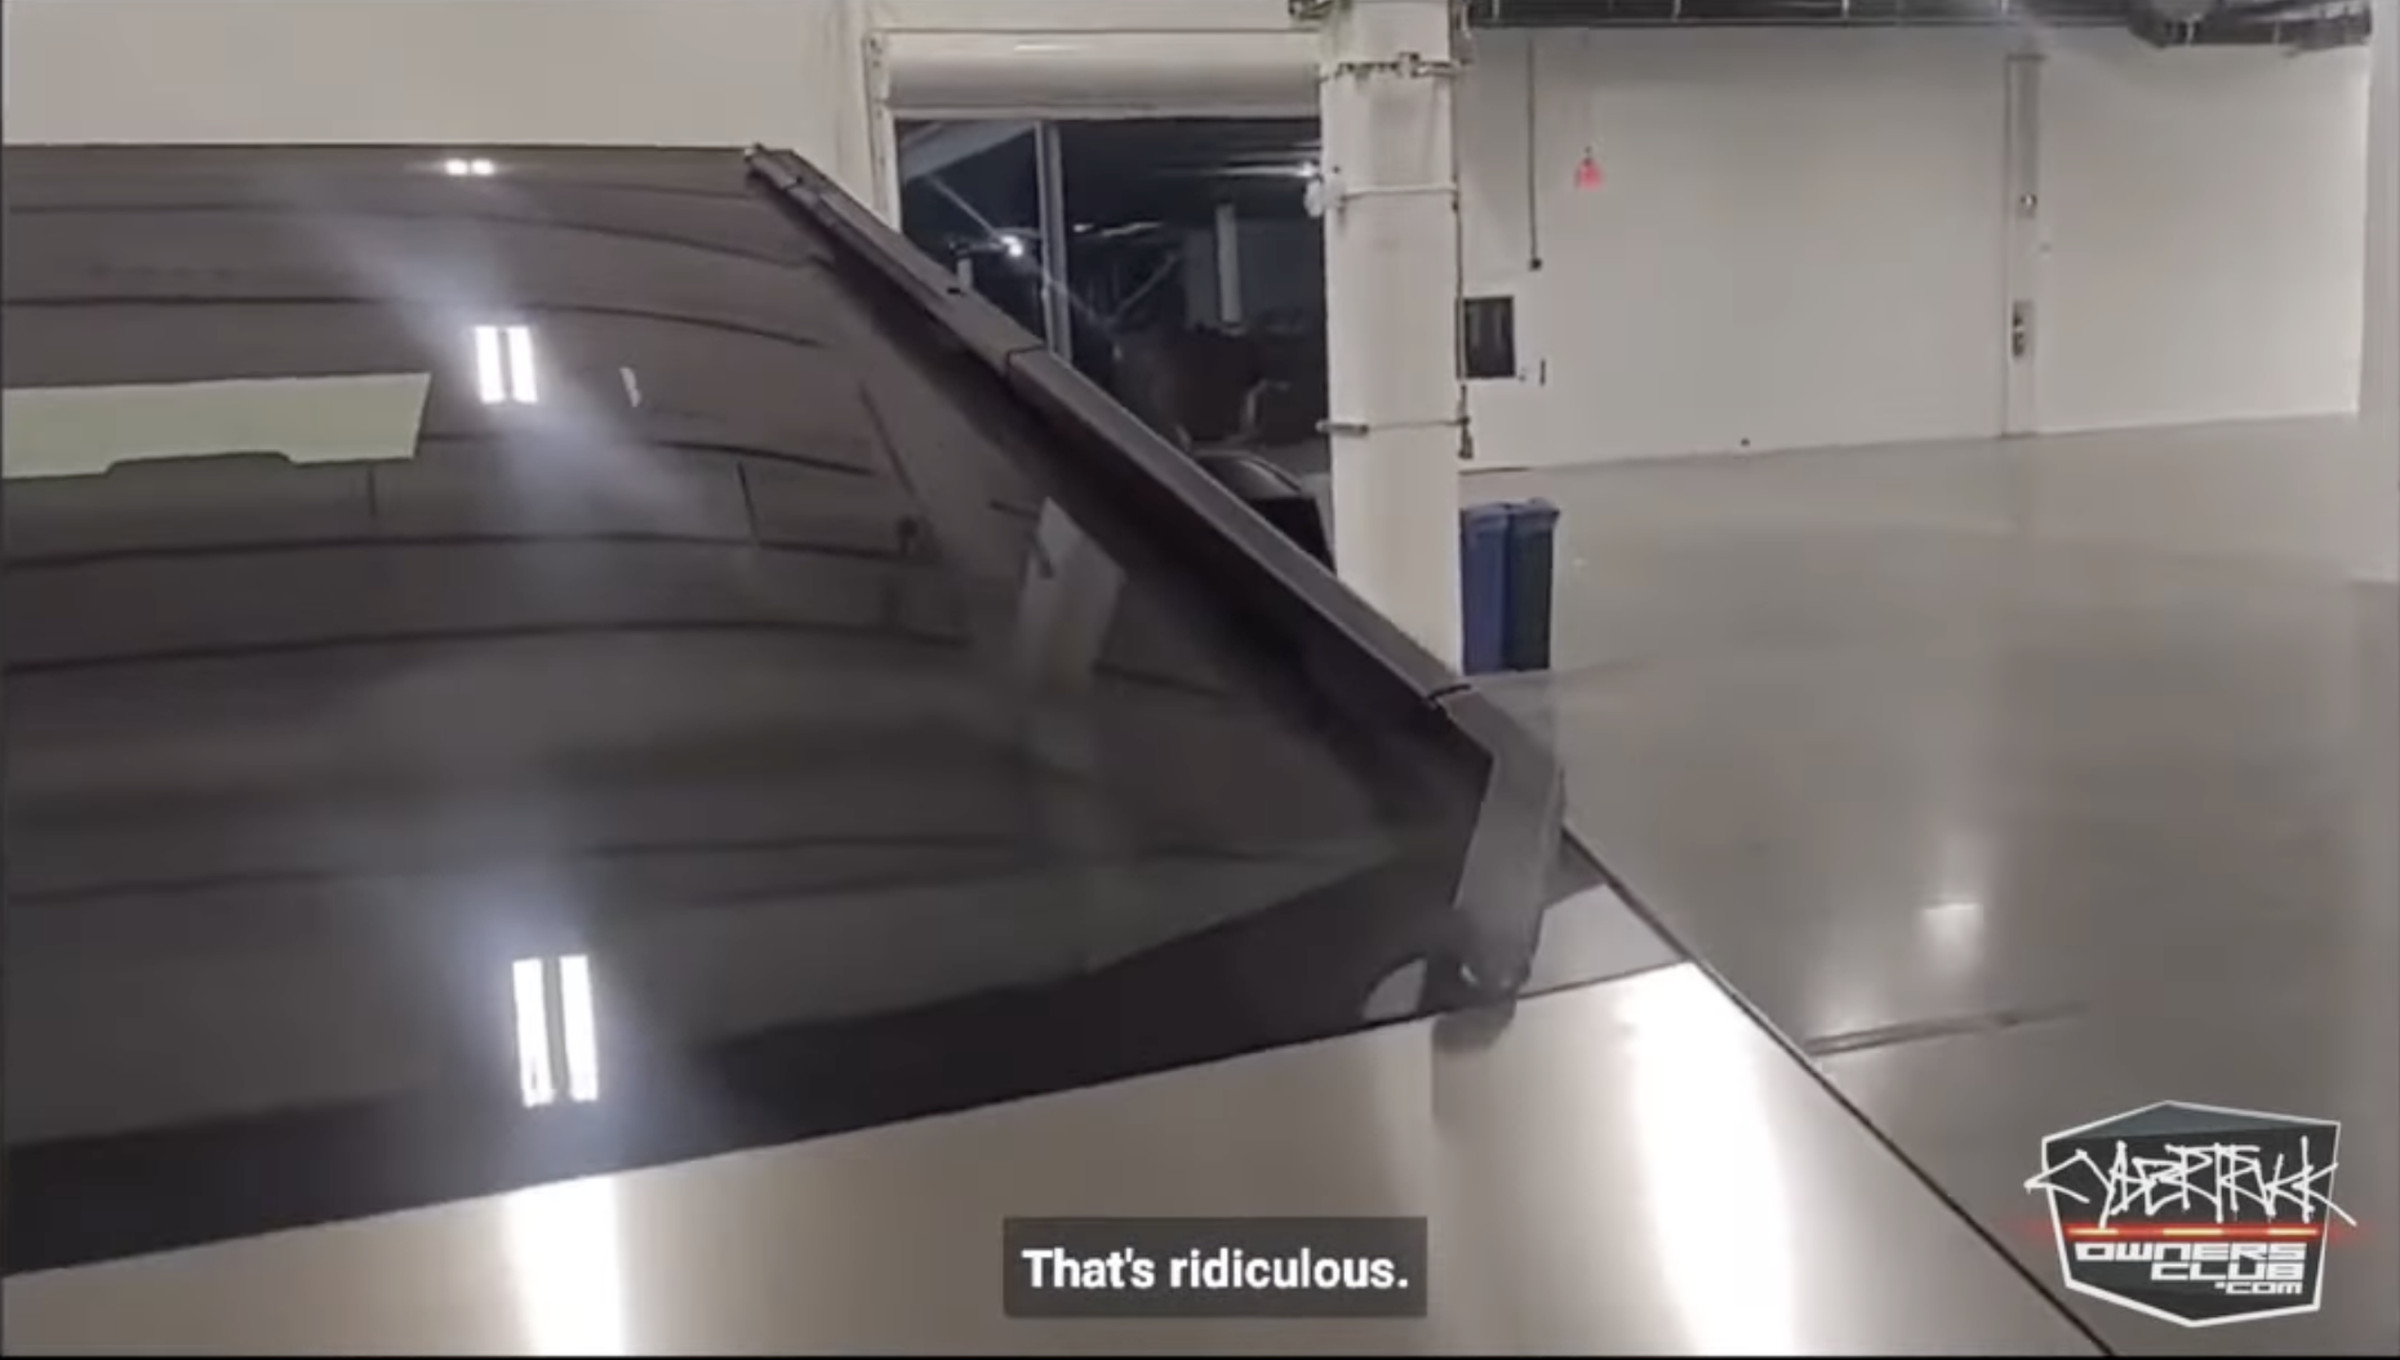 The person in the video seems to express doubt that it can clean the entire windshield but is assured it can.